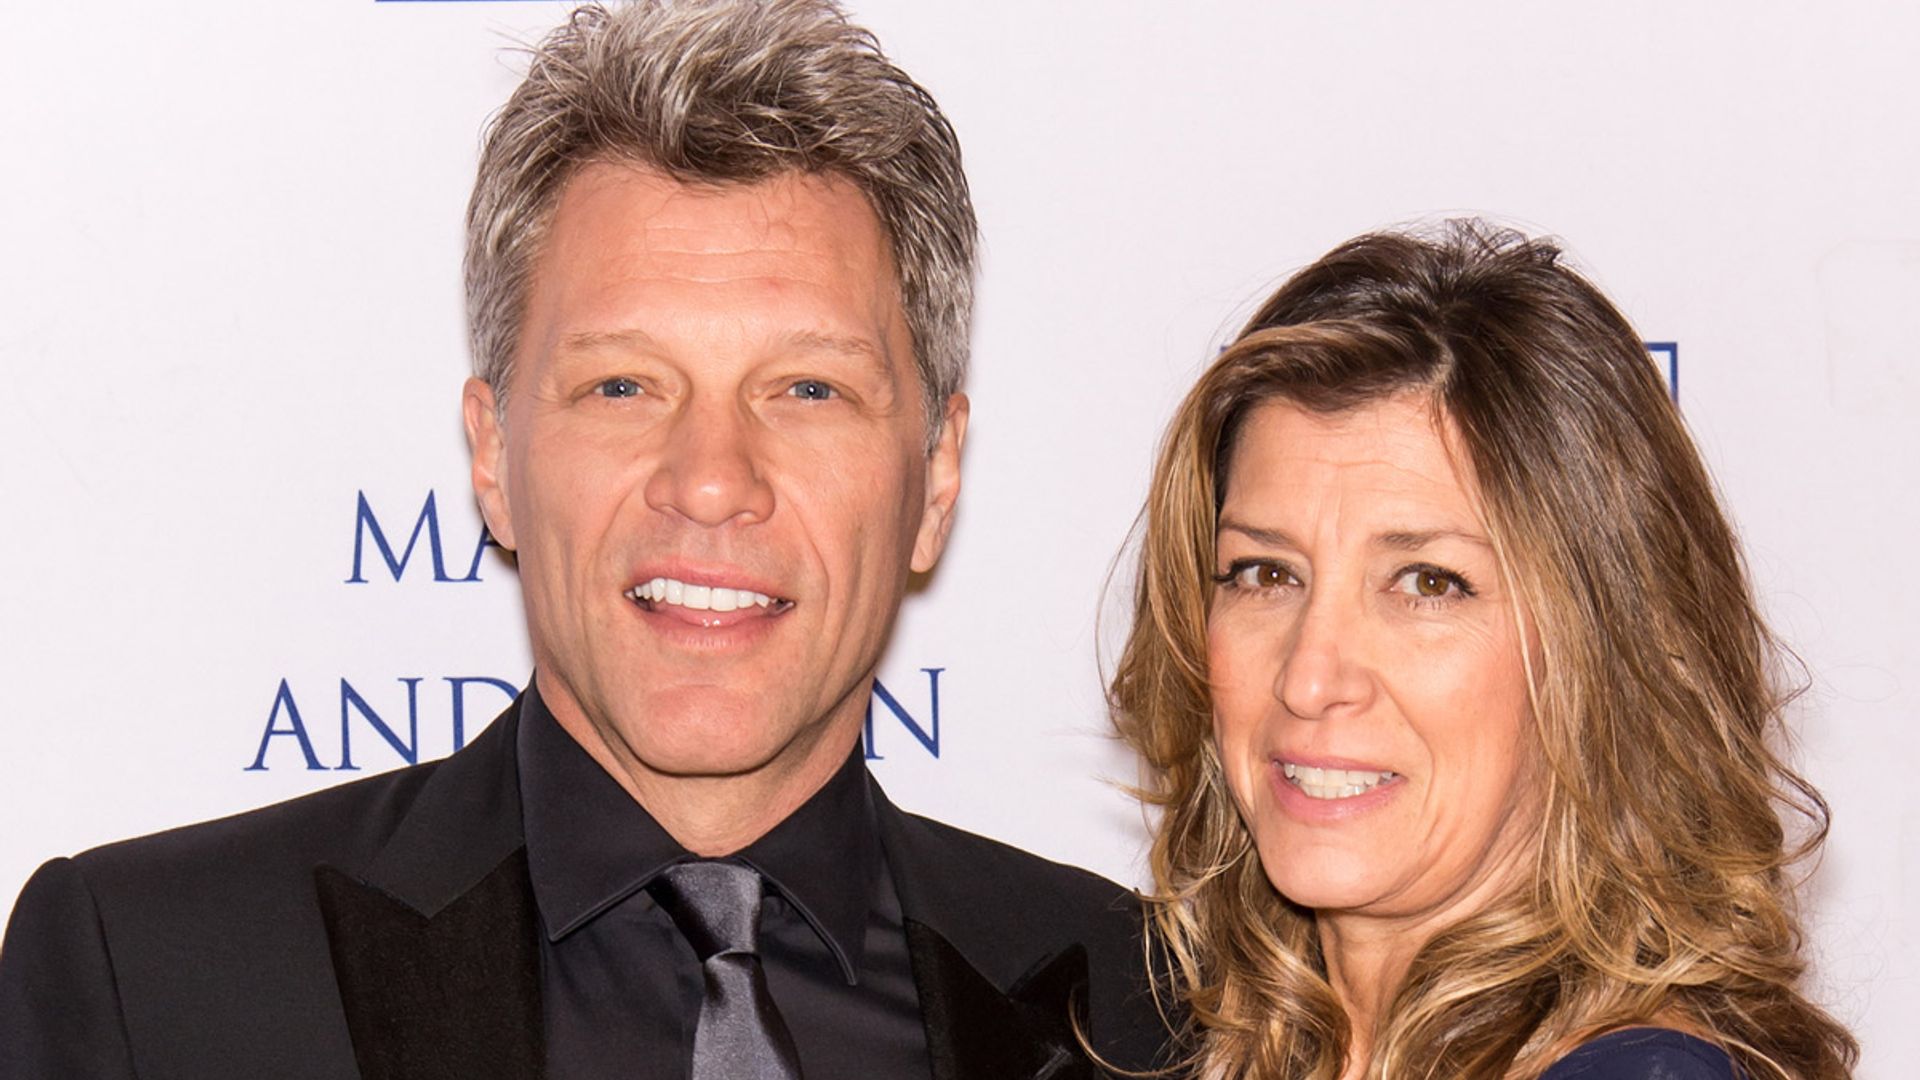 Jon Bon Jovi inundated with messages as he celebrates in rare personal video